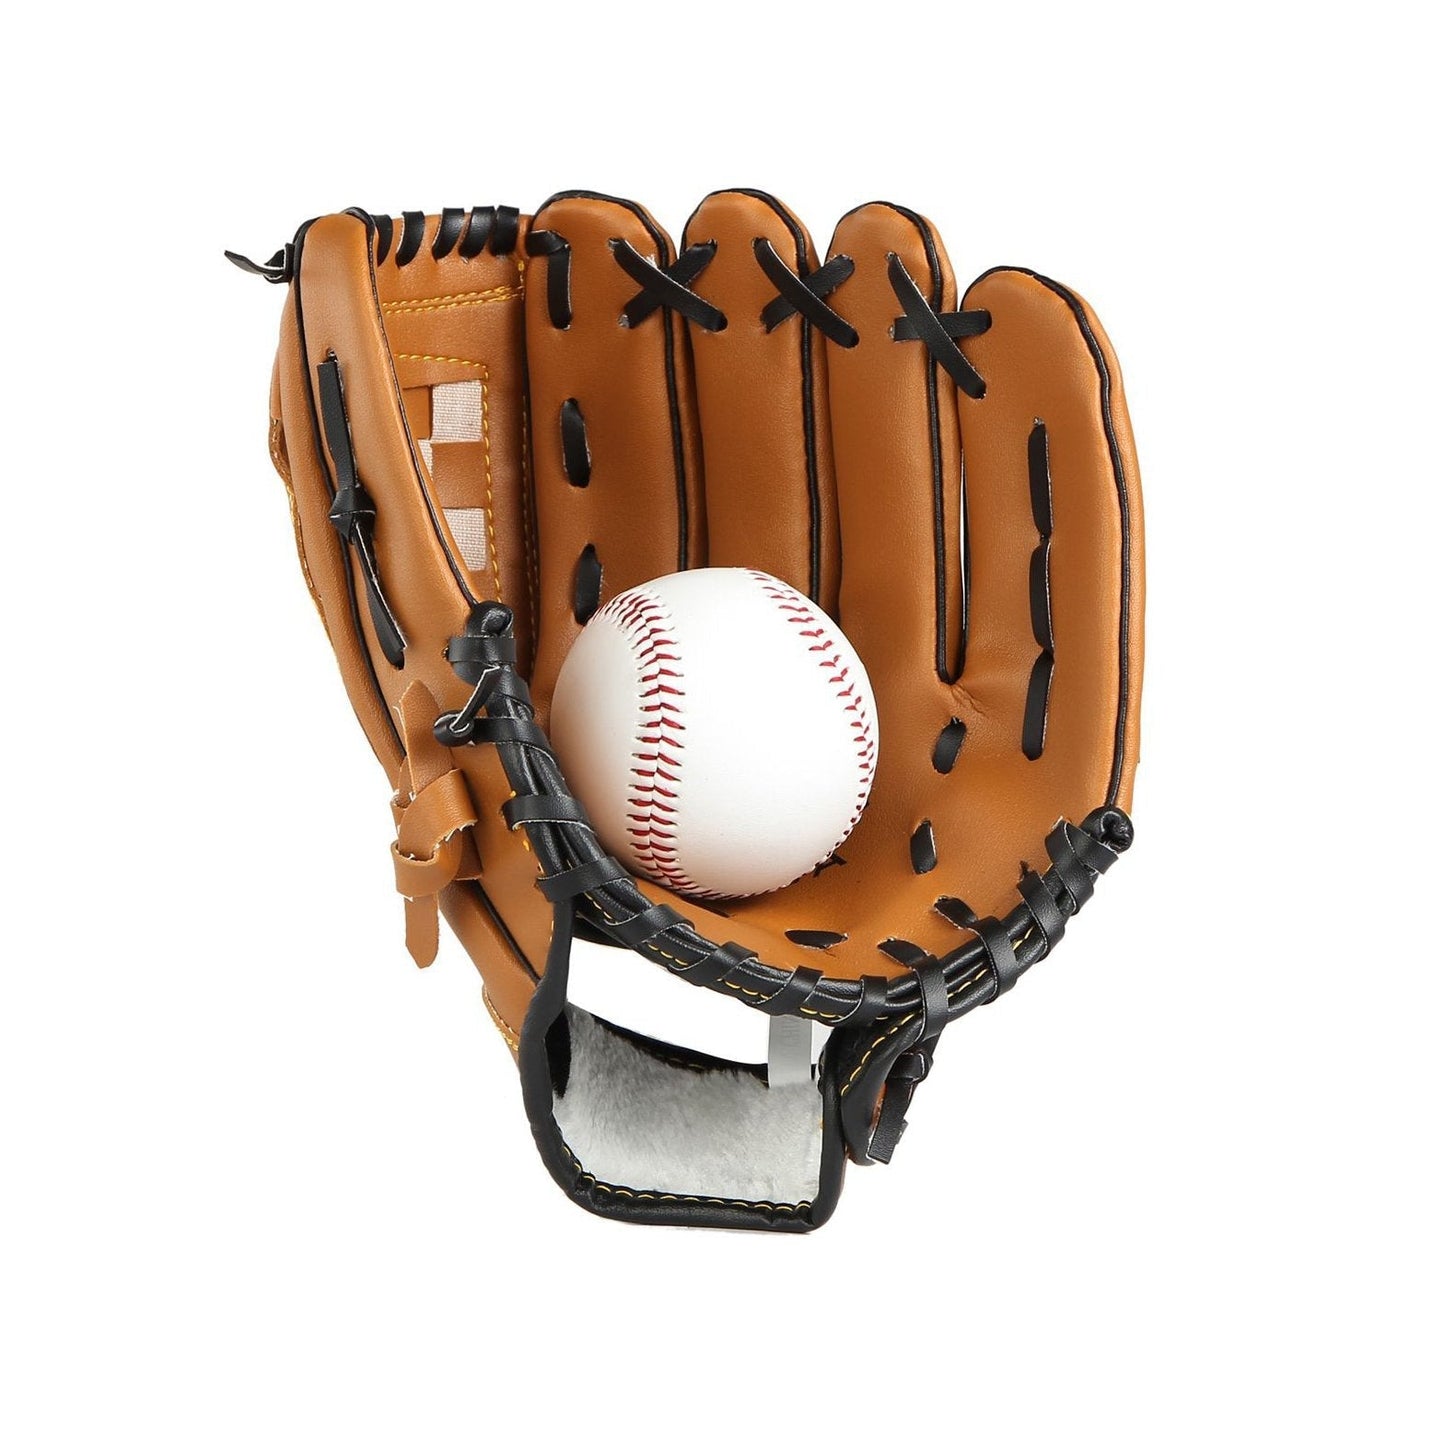 Sports Baseball Softball Midwest Outdoor Catch Glove Pack of 1 1166 (Parcel Rate)